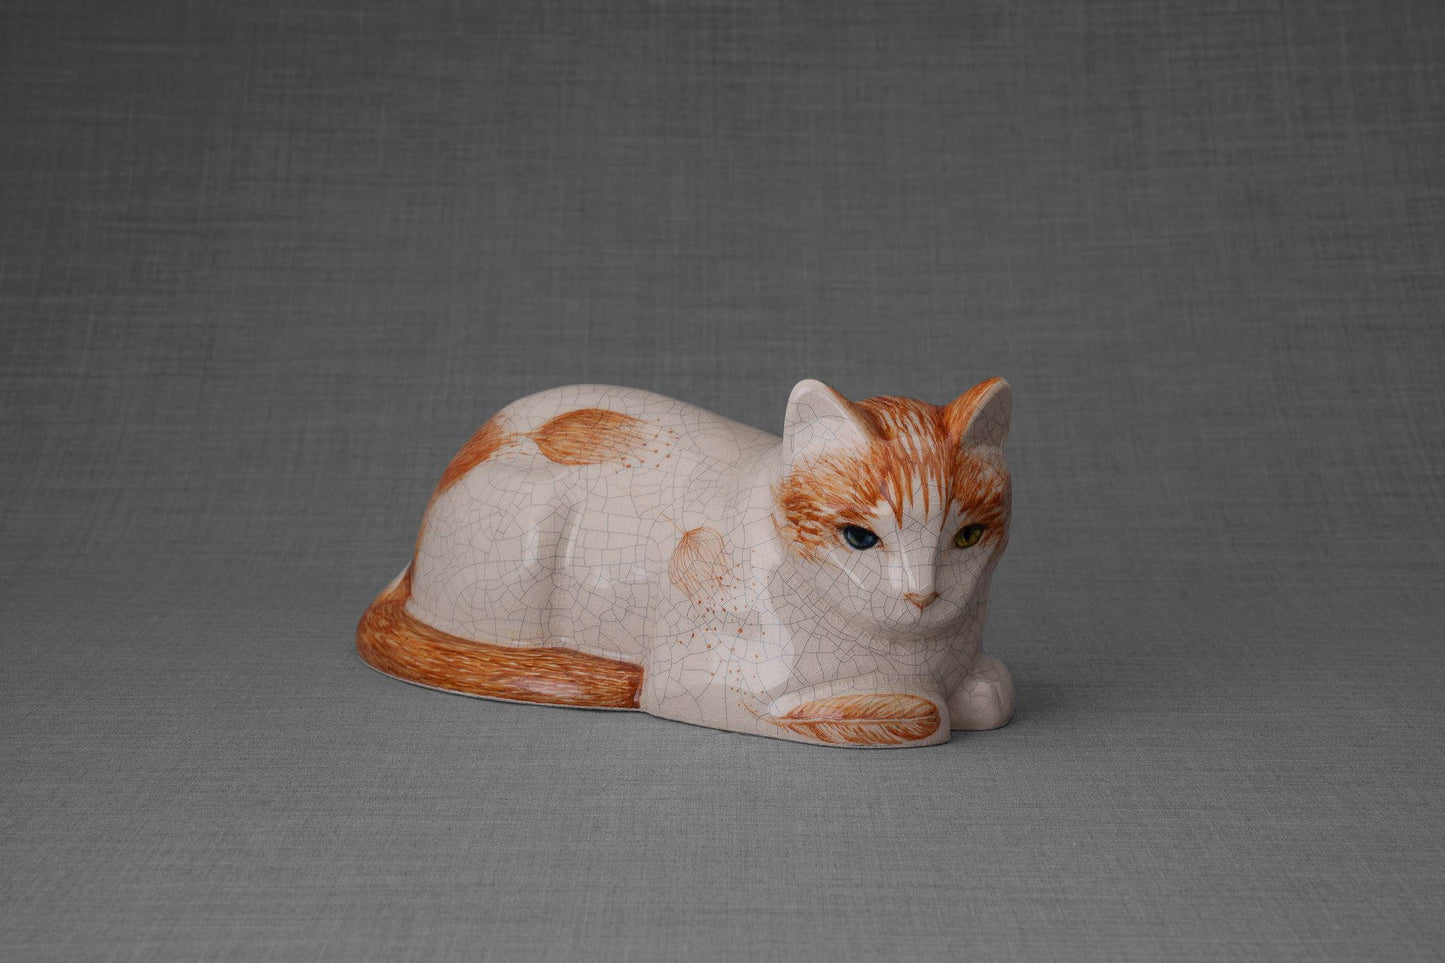 Pulvis Art Urns Pet Urn Hand Decorated Cat Urn for Ashes  "Feathers" - Ceramic | Handmade